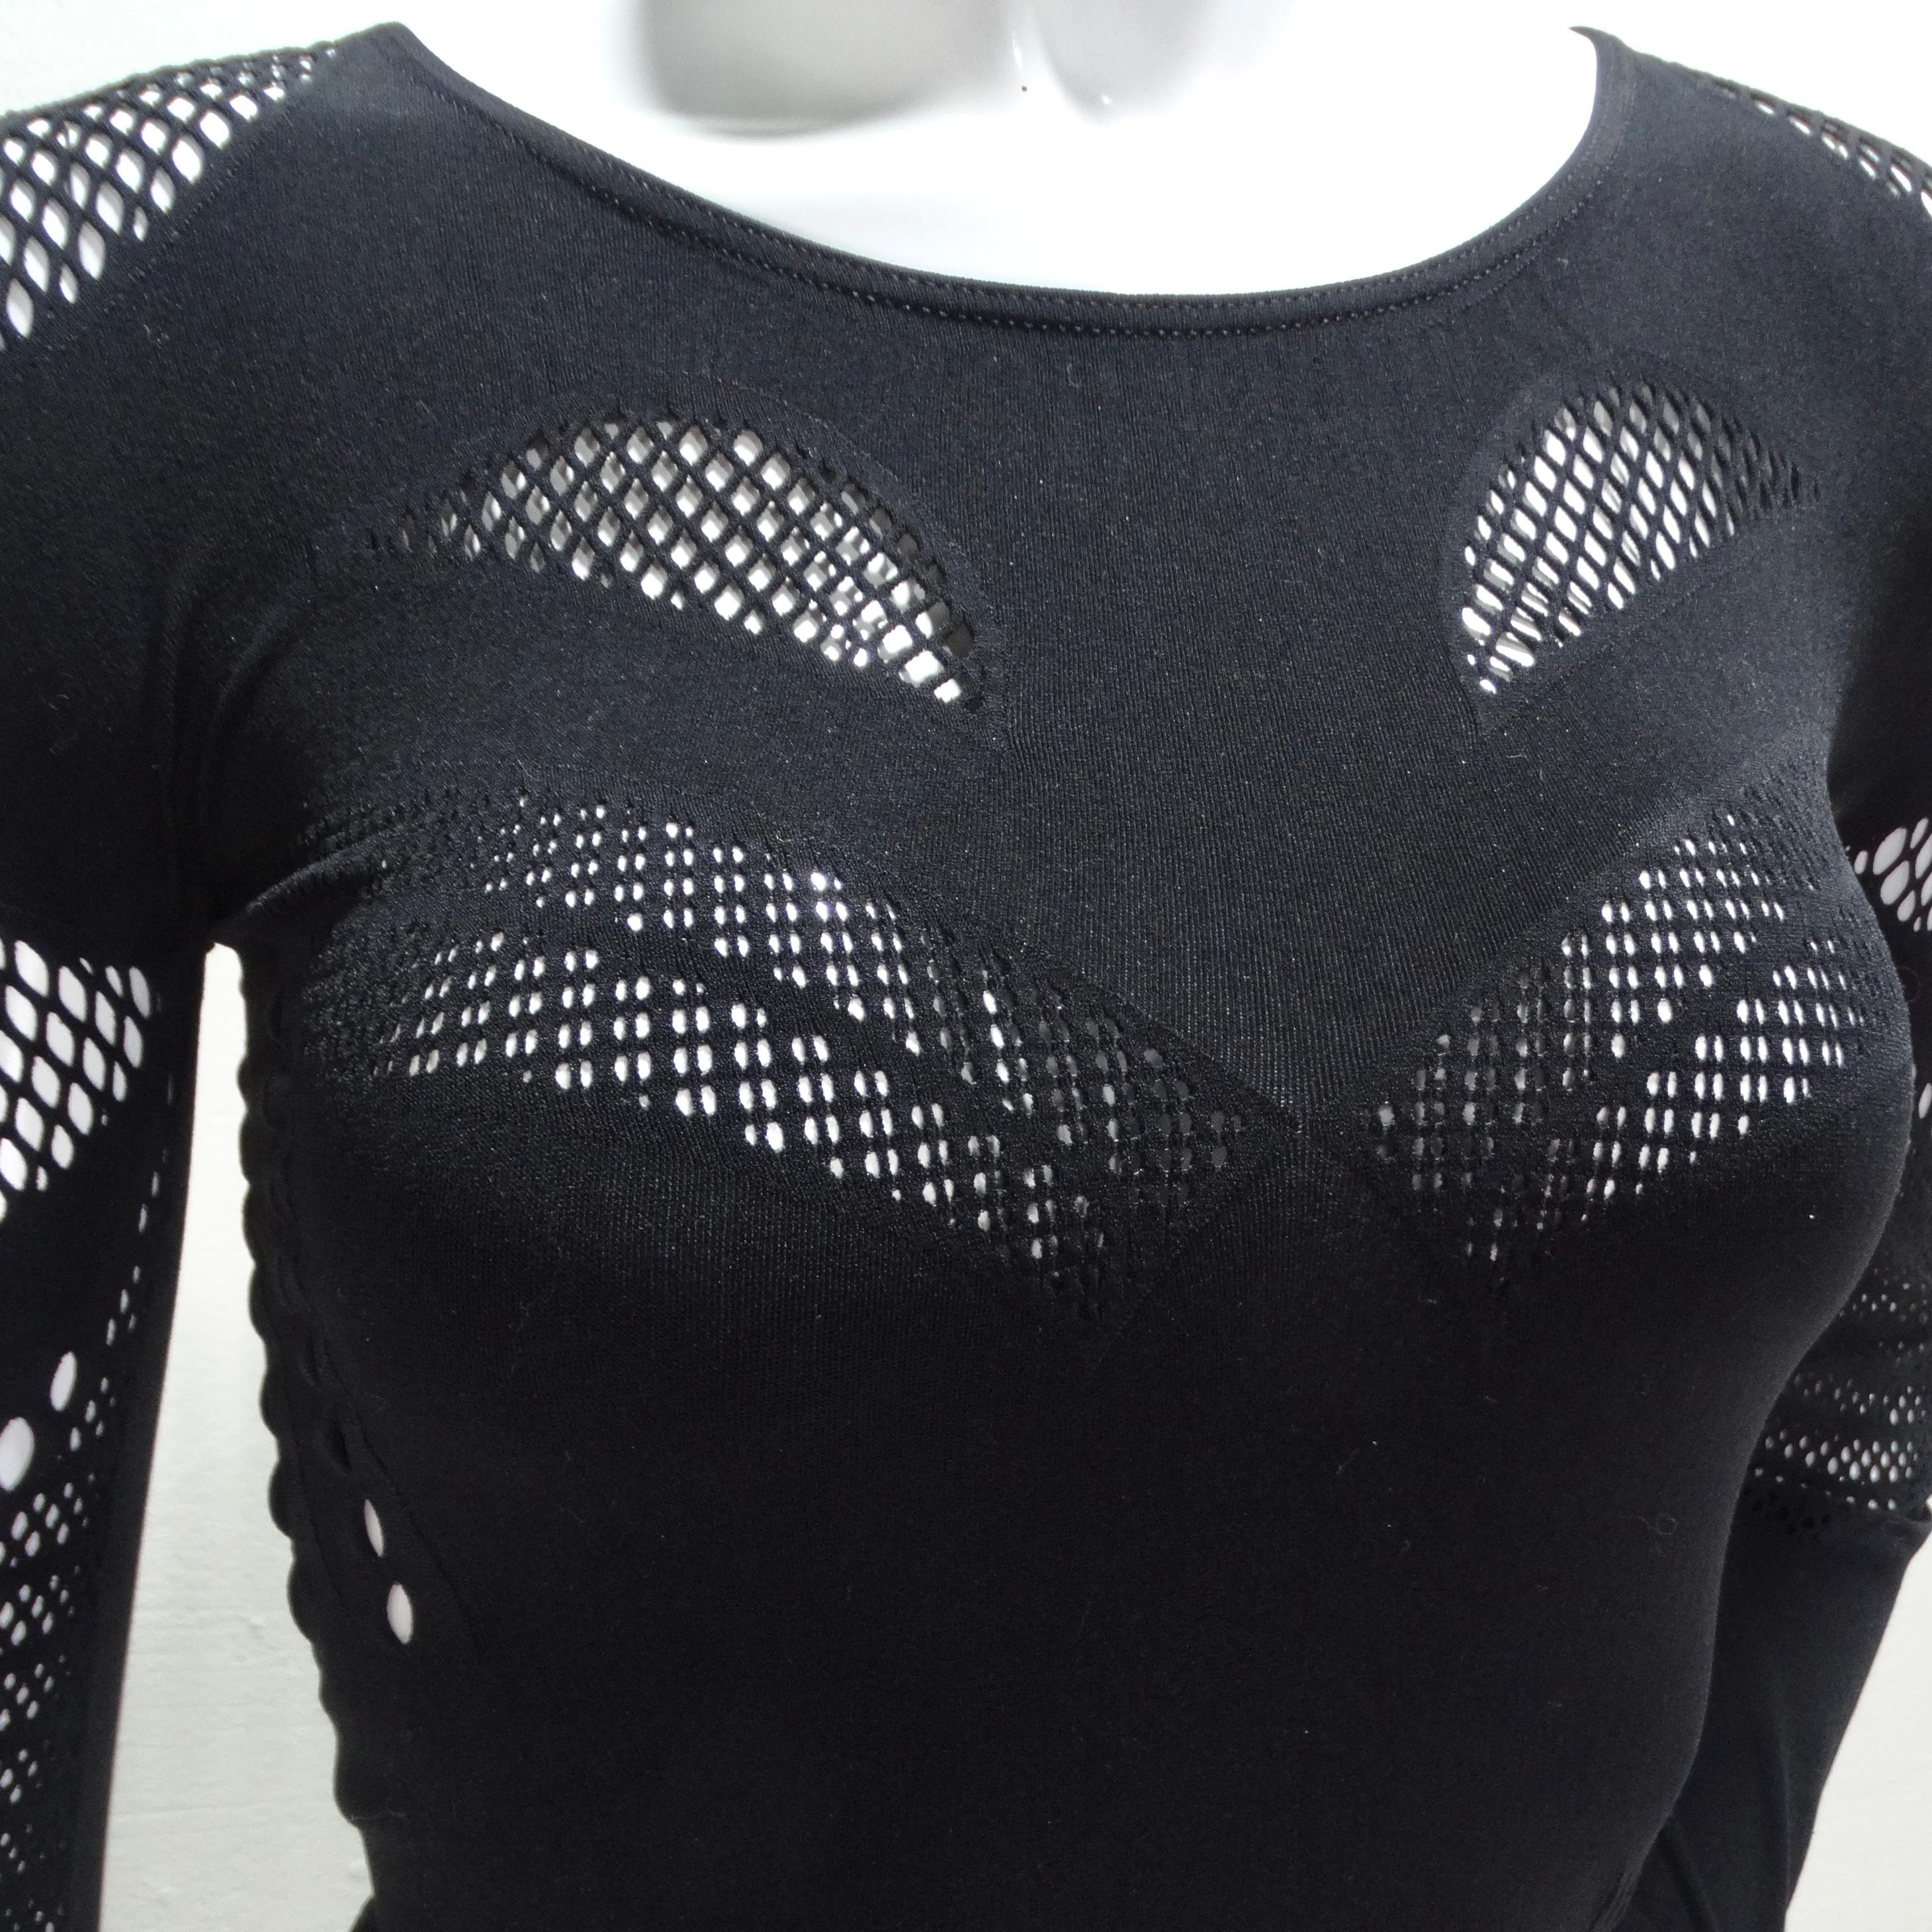 Introducing the Alexander McQueen Black Mesh Cut Out Top – a daring and sophisticated addition to your wardrobe that seamlessly combines elegance with edginess. This black long sleeve ultra-stretchy knit top is designed to captivate attention with